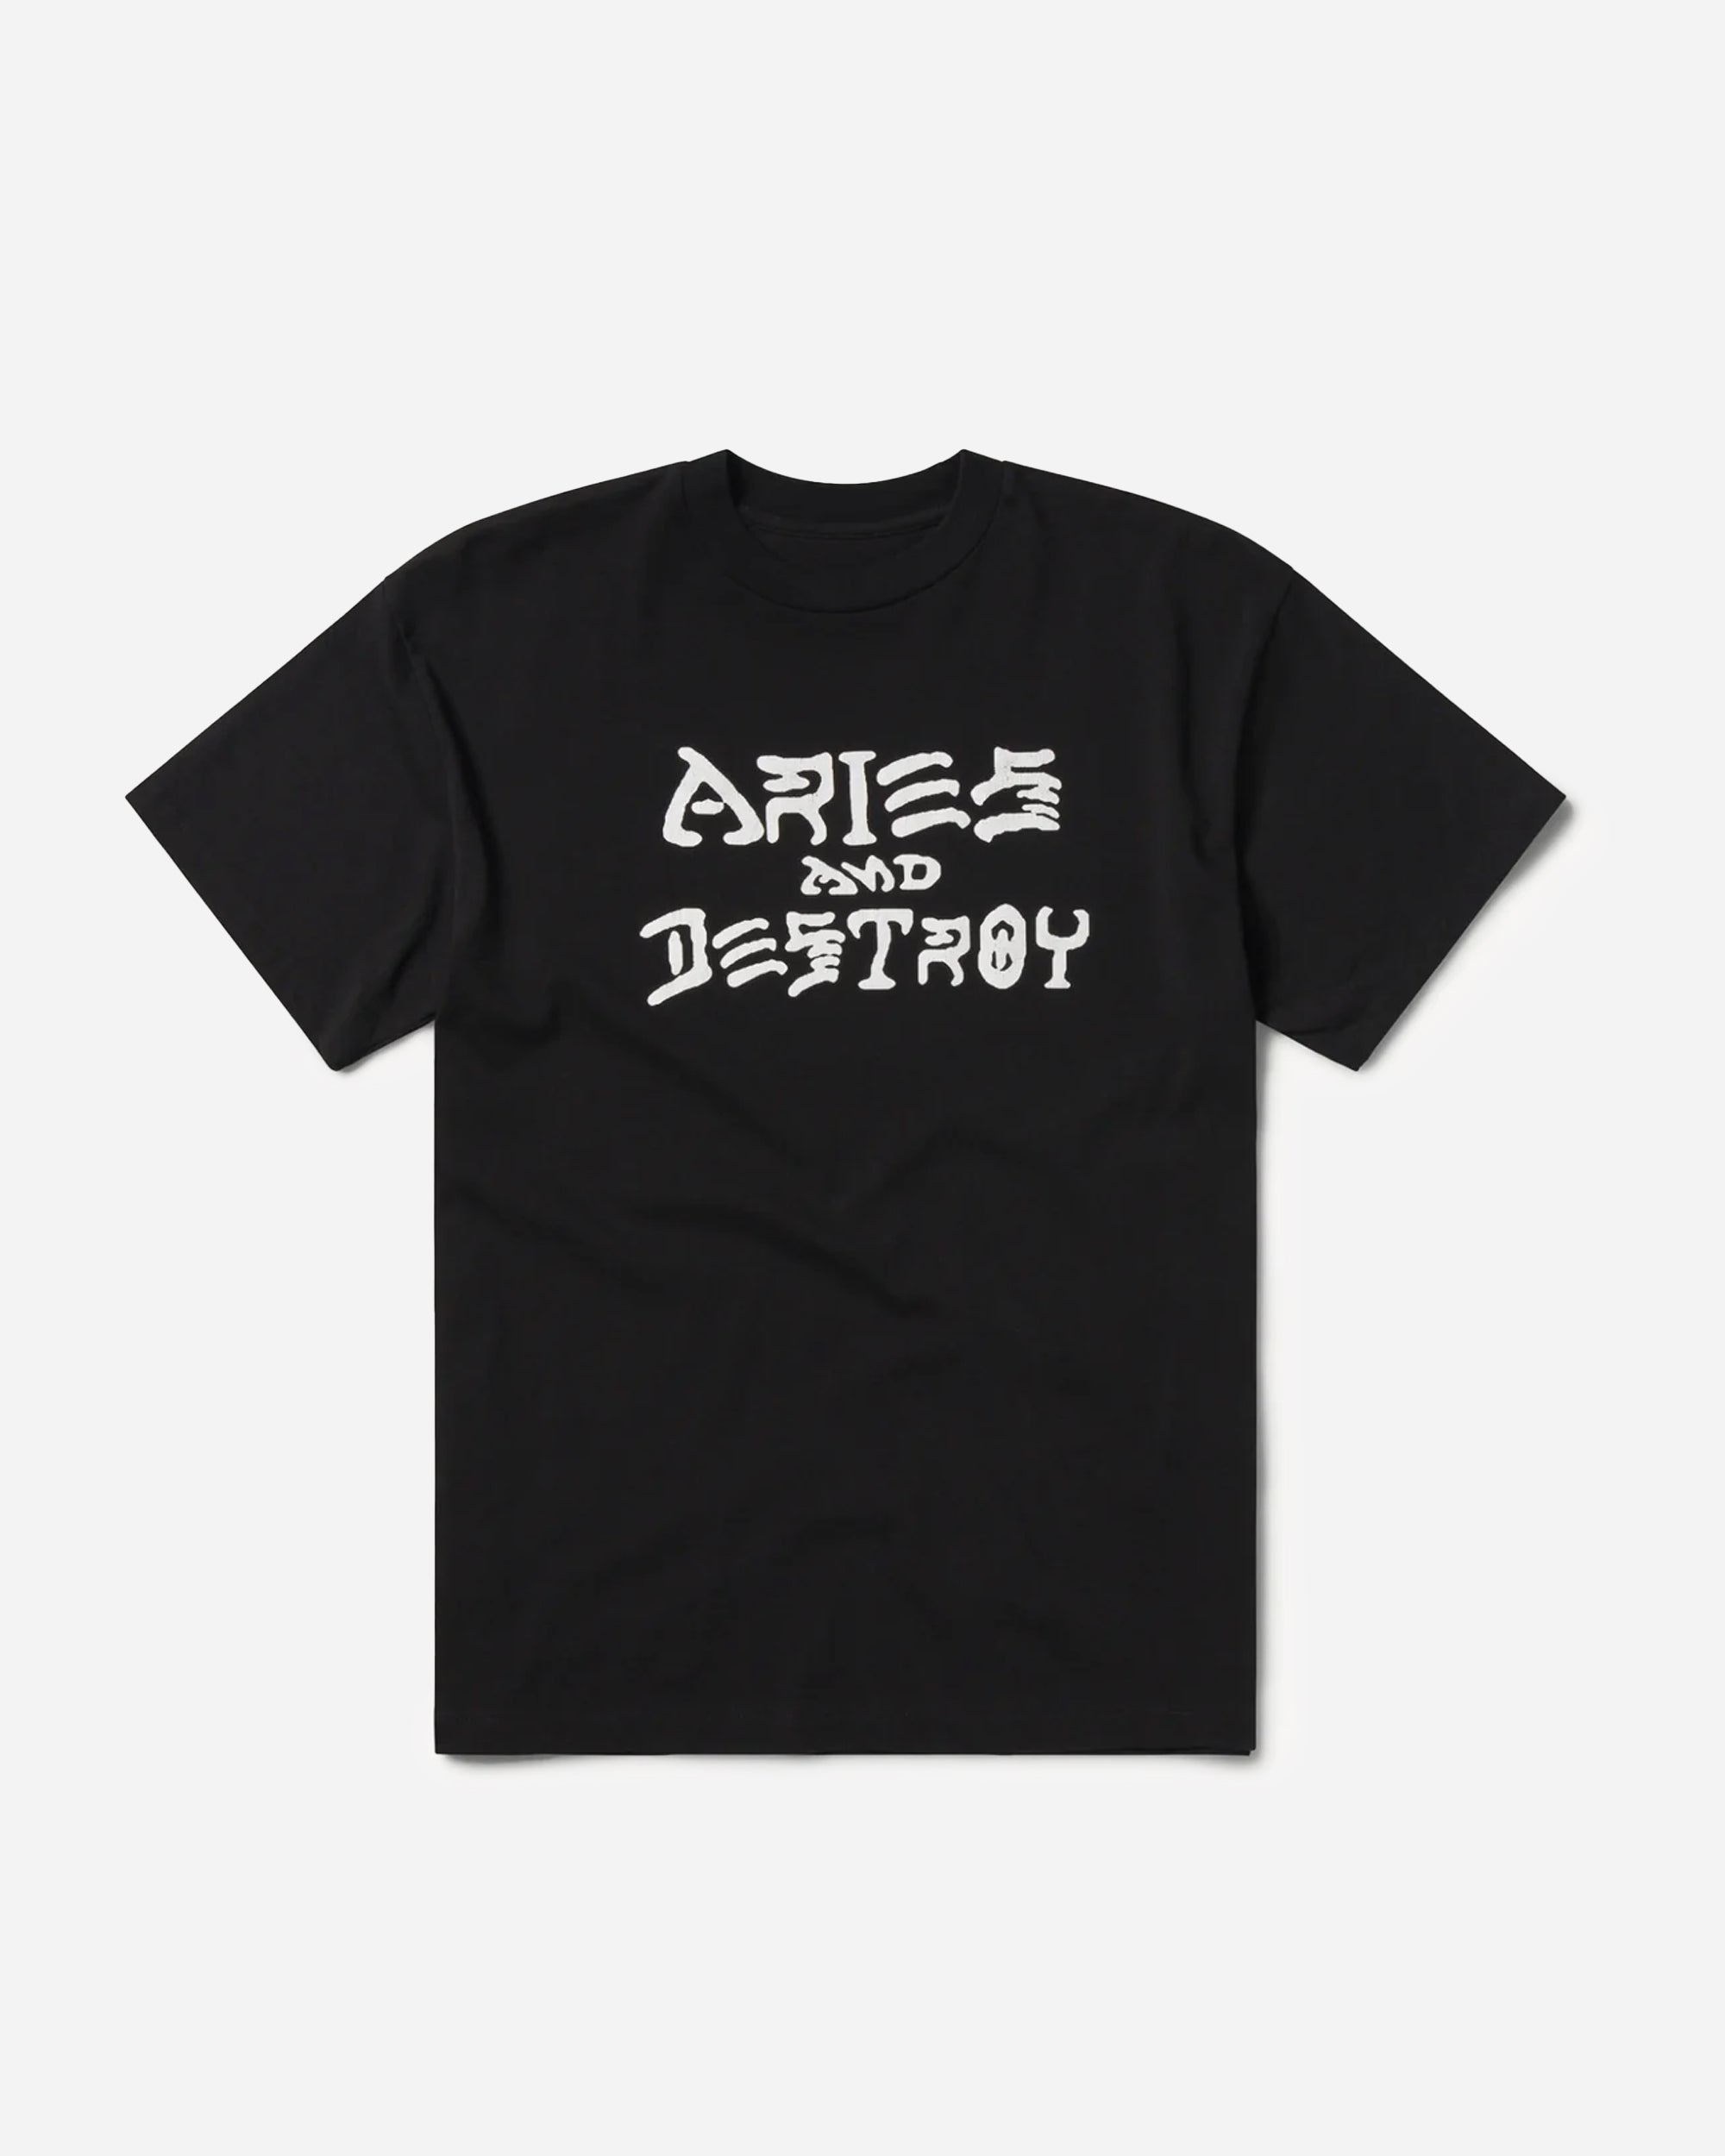 Vintage Aries and Destroy T-shirt